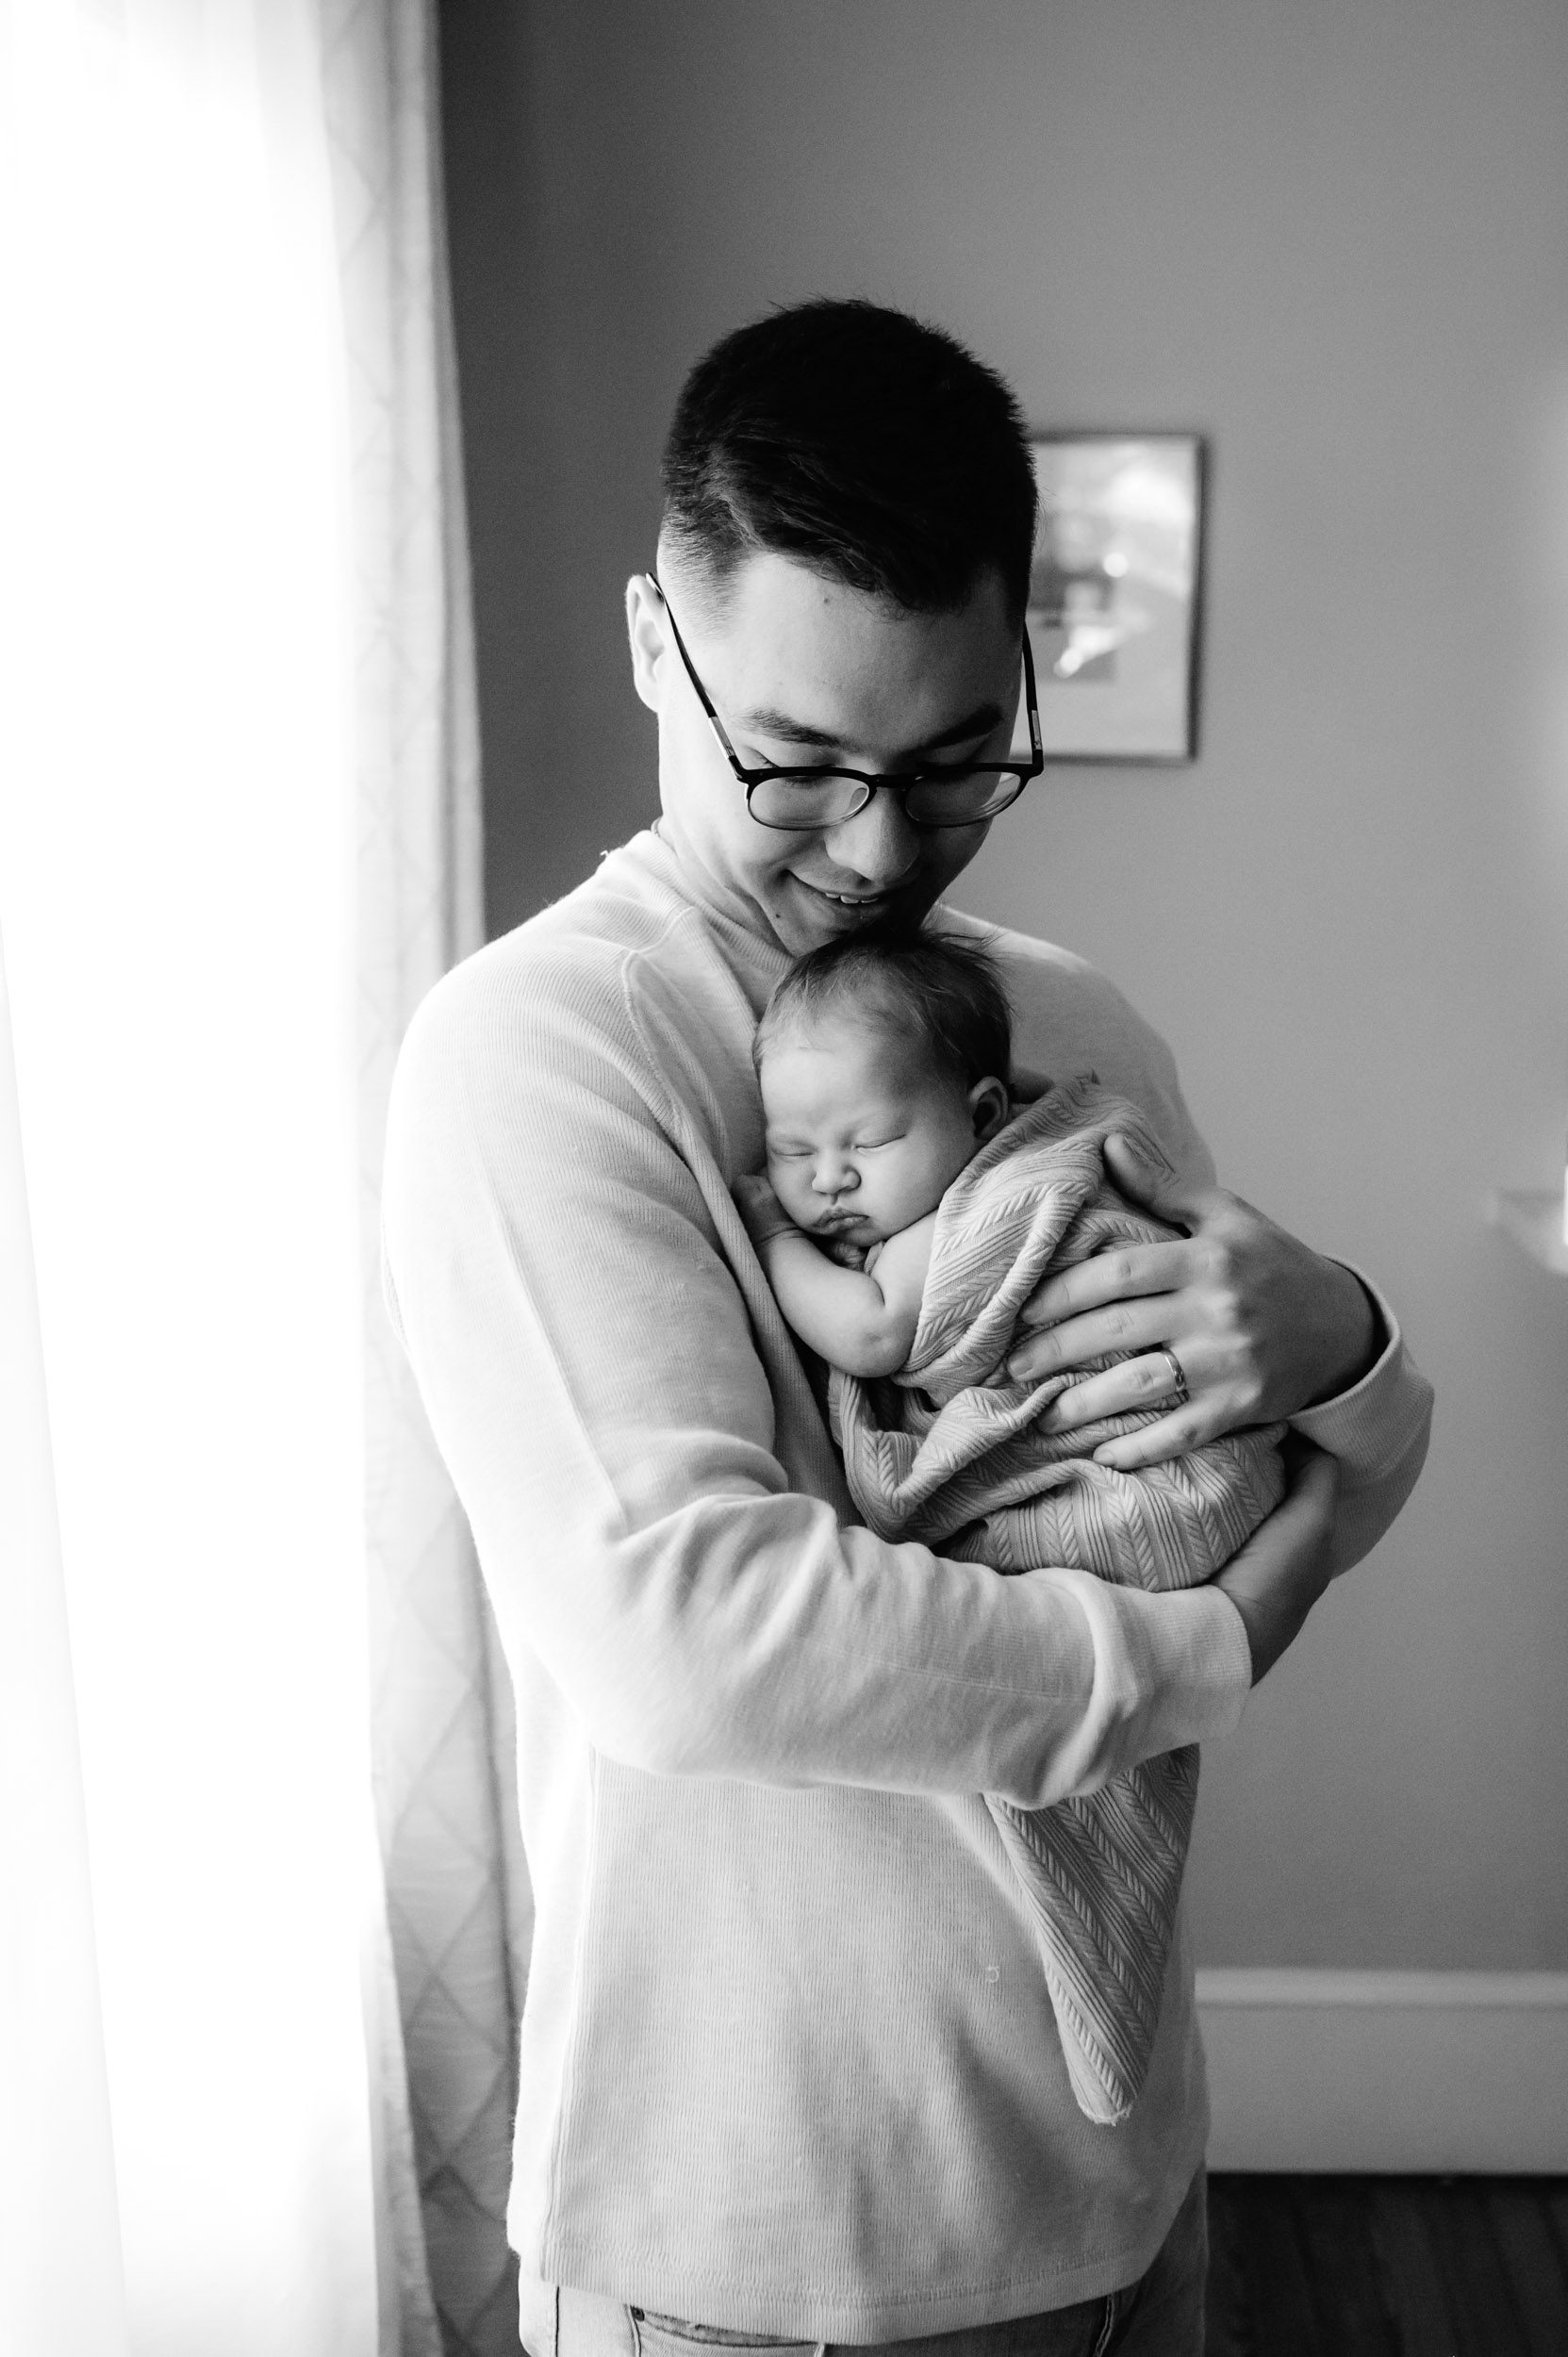 a black and white picture of a new father holding his baby girl against his chest and smiling down at her as she sleeps peacefully taken during an in home newborn photoshoot